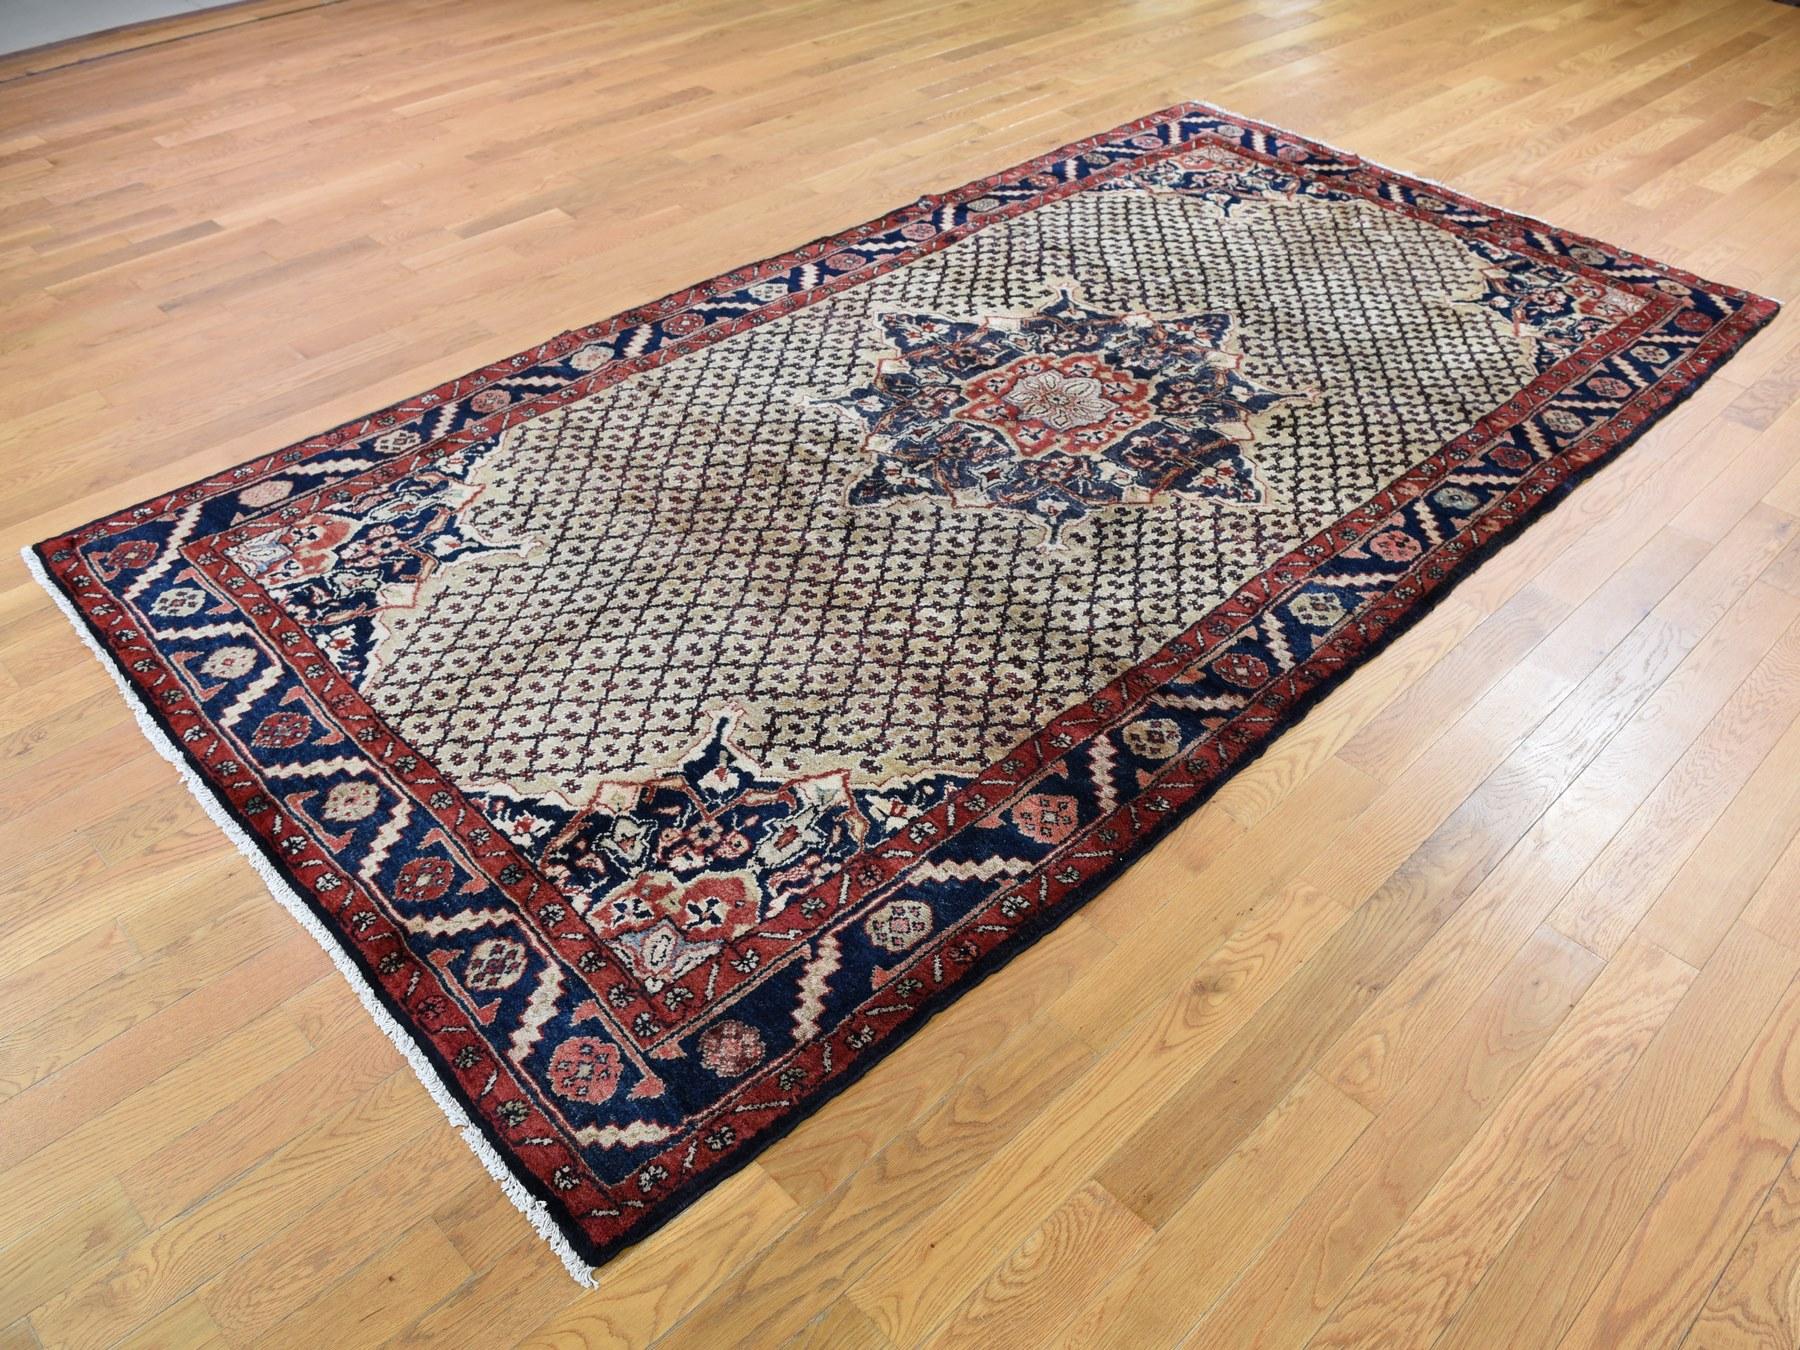 Hollywood Regency Gallery Size Vintage Persian Hamadan Camel Hair Pure Wool Hand Knotted Rug